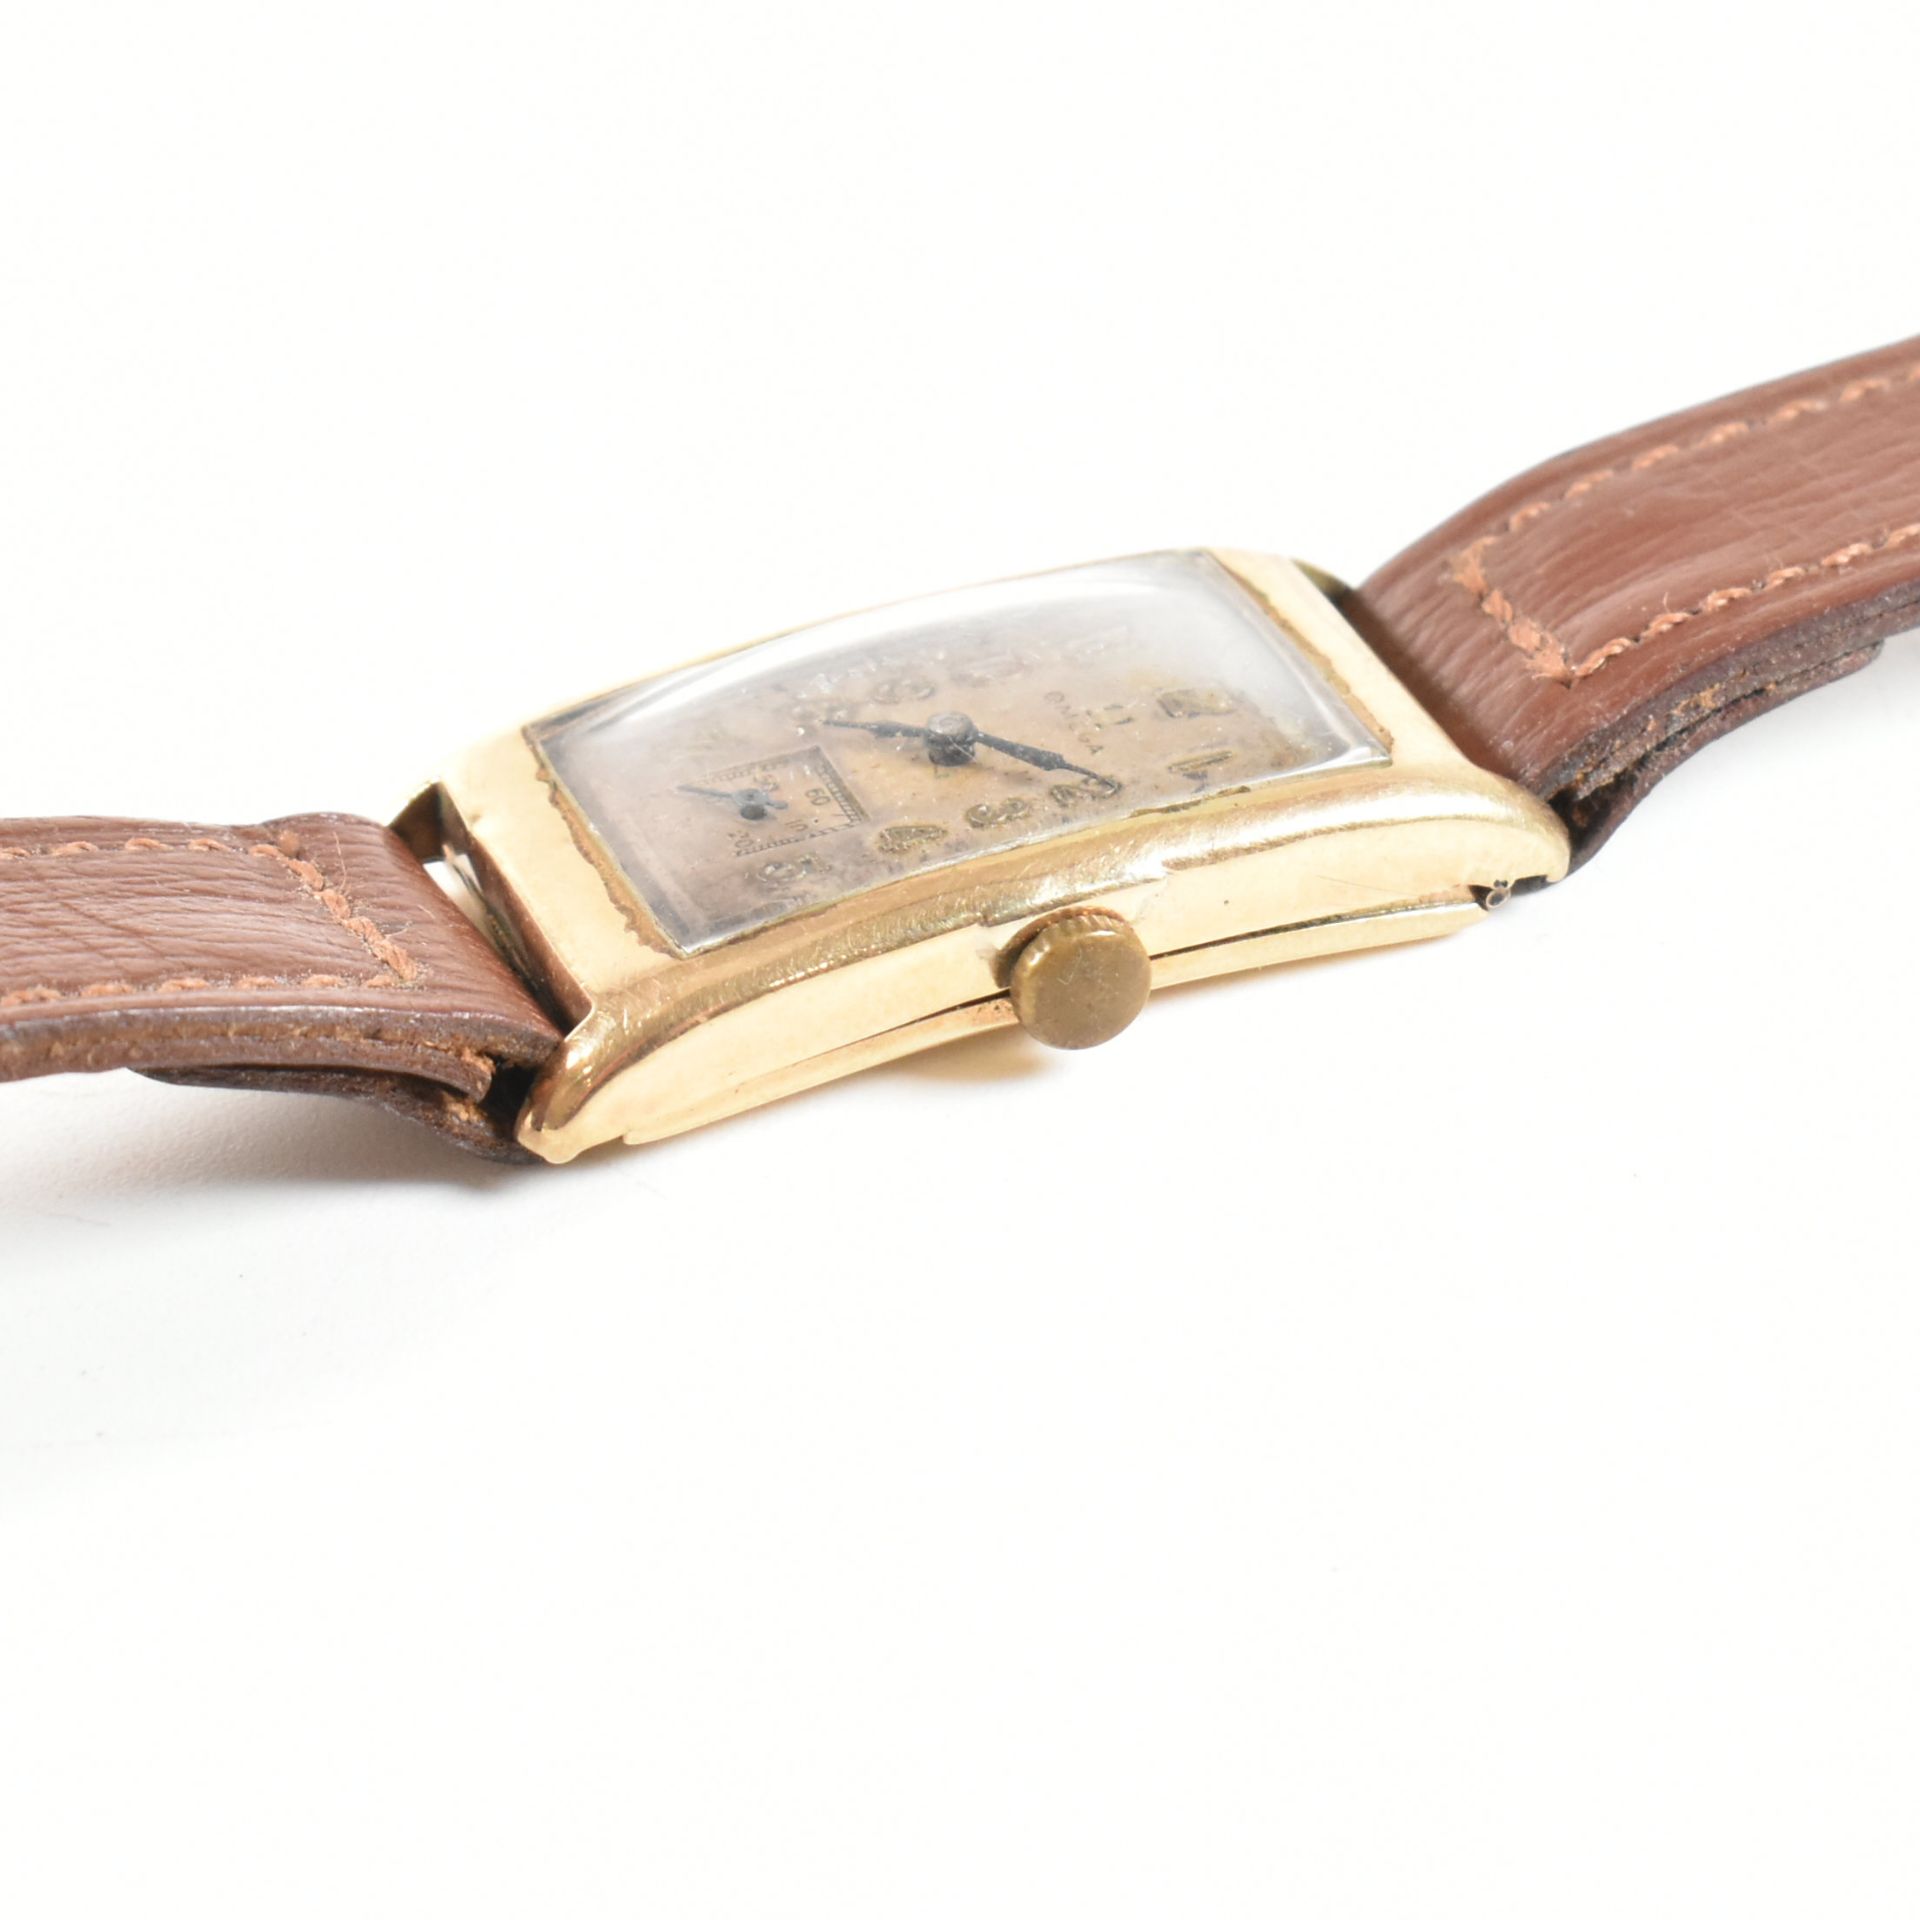 EARLY 20TH CENTURY OMEGA 9CT GOLD WRISTWATCH - Image 4 of 7